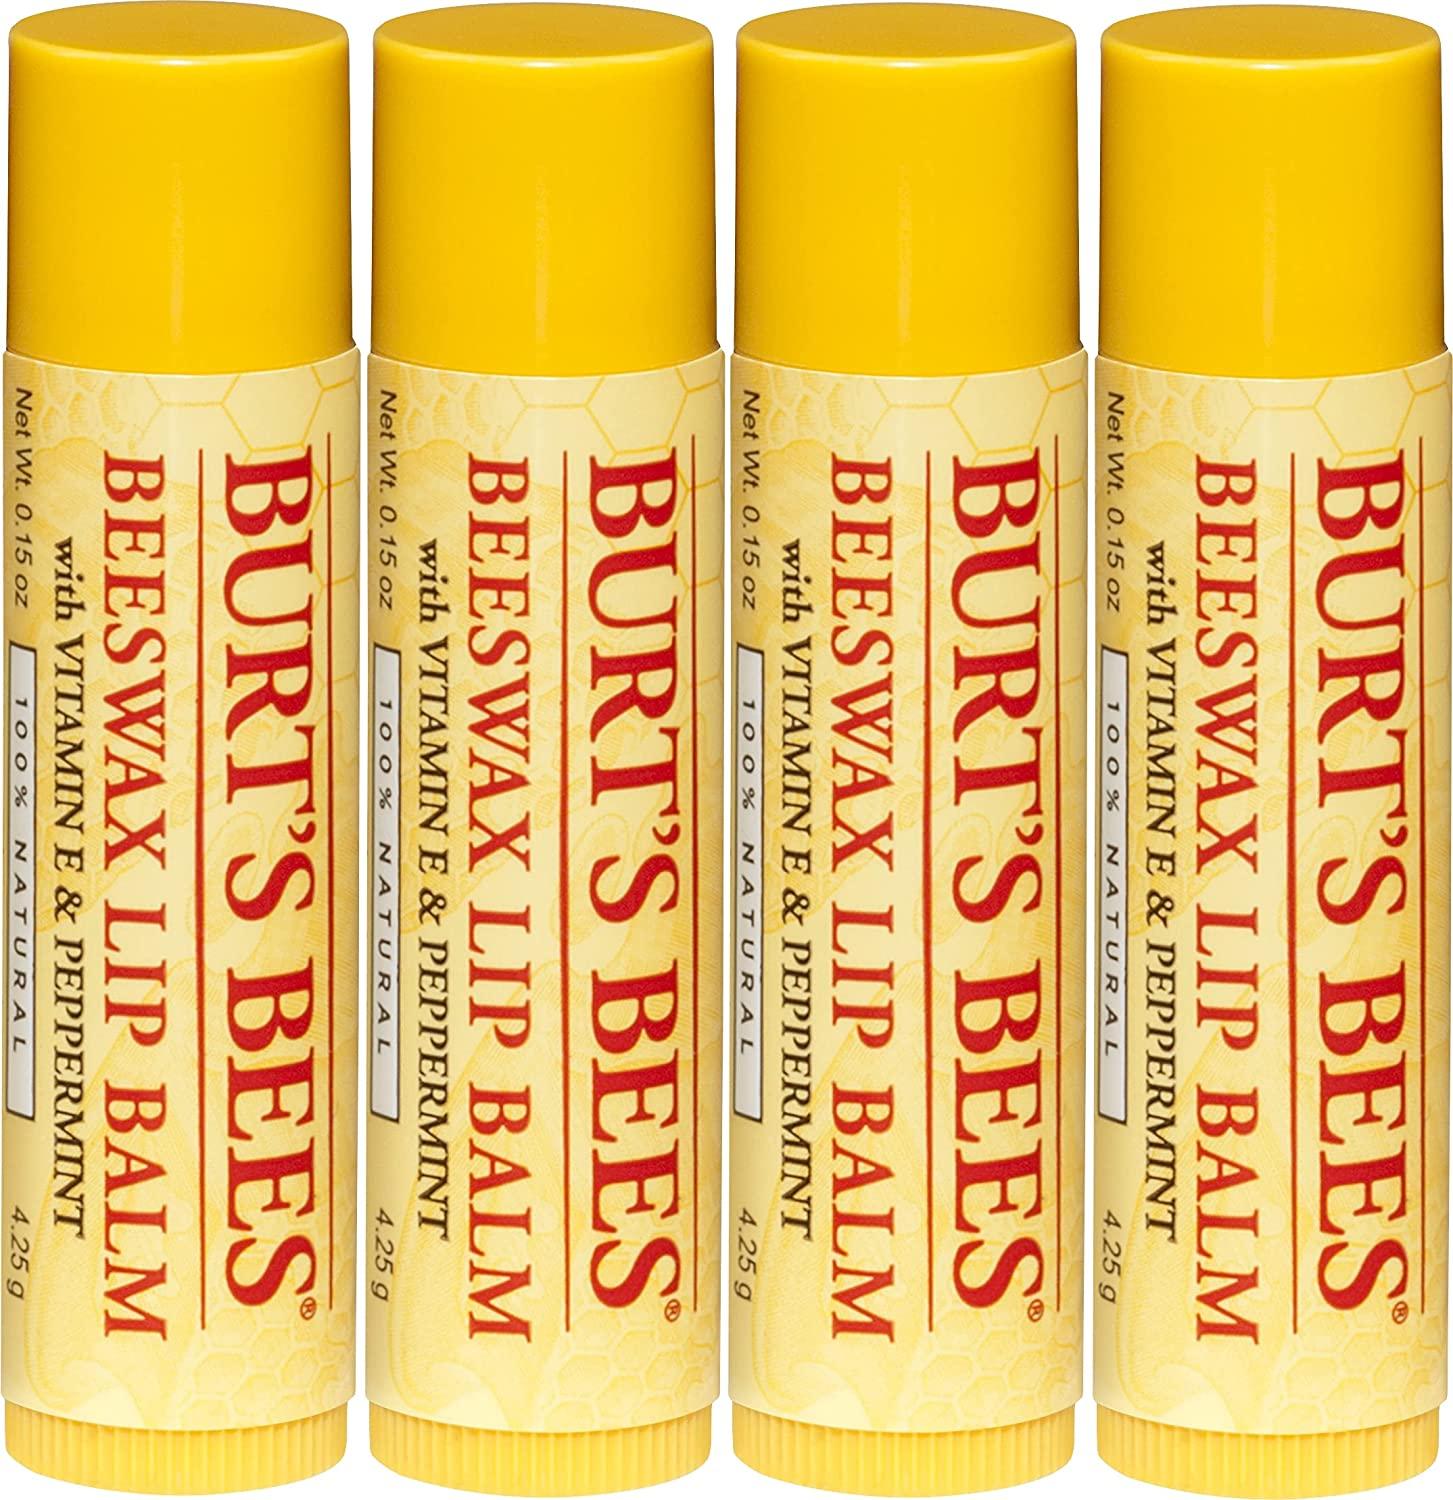 Burt's Bees Beeswax Lip Balm with Vitamin E & Peppermint 0.15 oz (Pack of  10)